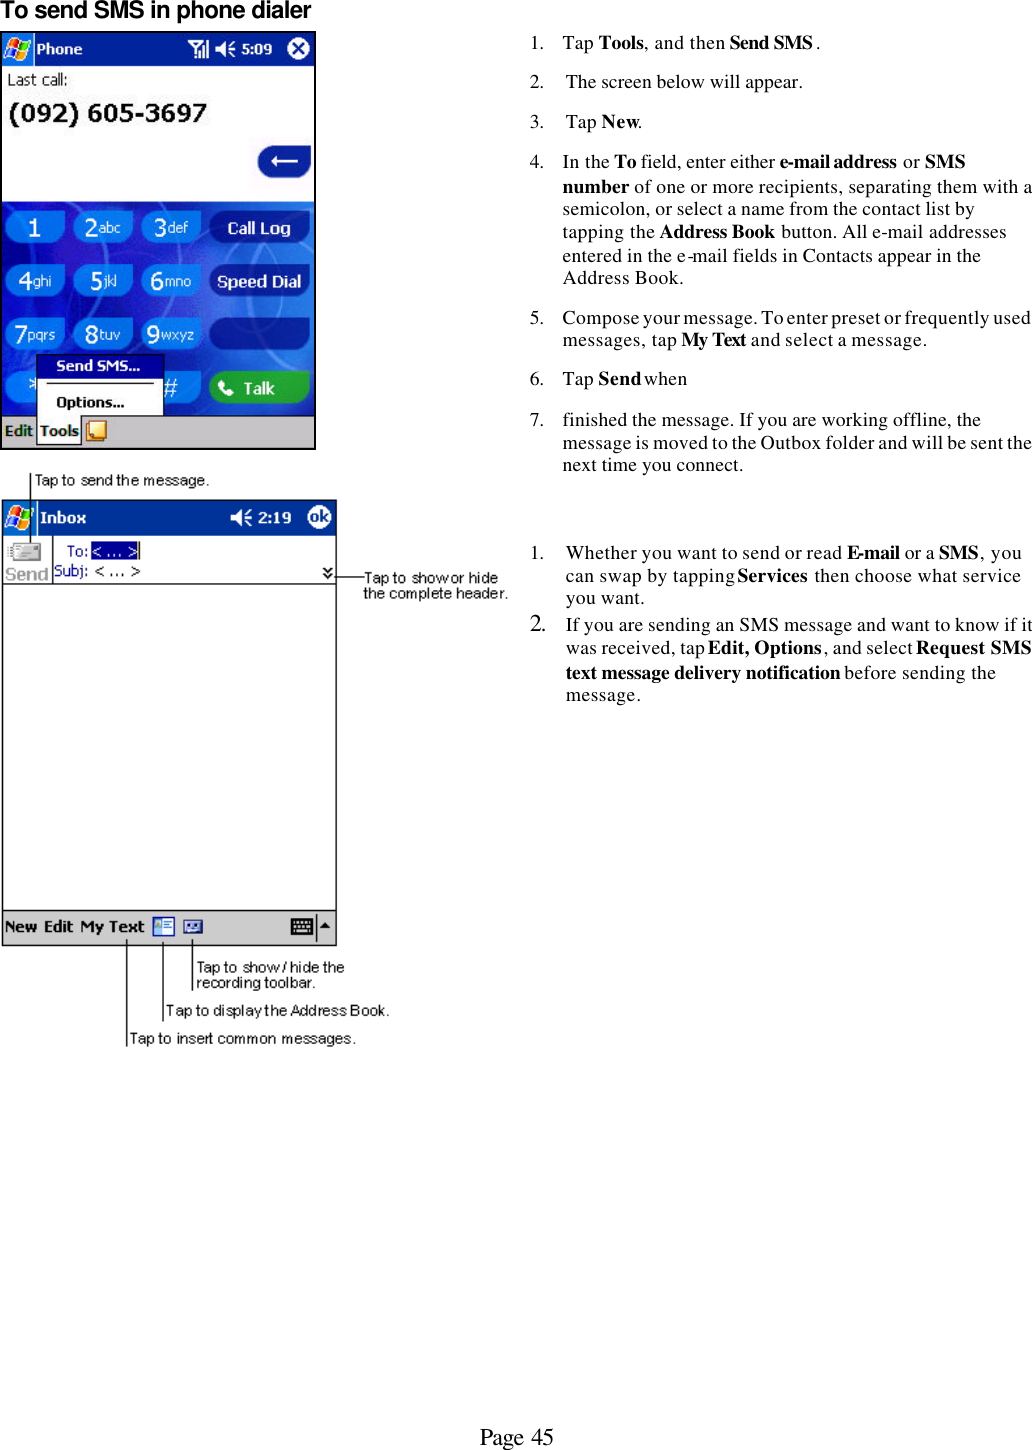 Page 45 To send SMS in phone dialer   1. Tap Tools, and then Send SMS.  2. The screen below will appear. 3. Tap New.  4. In the To field, enter either e-mail address or SMS number of one or more recipients, separating them with a semicolon, or select a name from the contact list by tapping the Address Book button. All e-mail addresses entered in the e-mail fields in Contacts appear in the Address Book. 5. Compose your message. To enter preset or frequently used messages, tap My Text and select a message. 6. Tap Send when  7. finished the message. If you are working offline, the message is moved to the Outbox folder and will be sent the next time you connect.   1. Whether you want to send or read E-mail or a SMS, you can swap by tapping Services then choose what service you want. 2. If you are sending an SMS message and want to know if it was received, tap Edit, Options, and select Request SMS text message delivery notification before sending the message.            